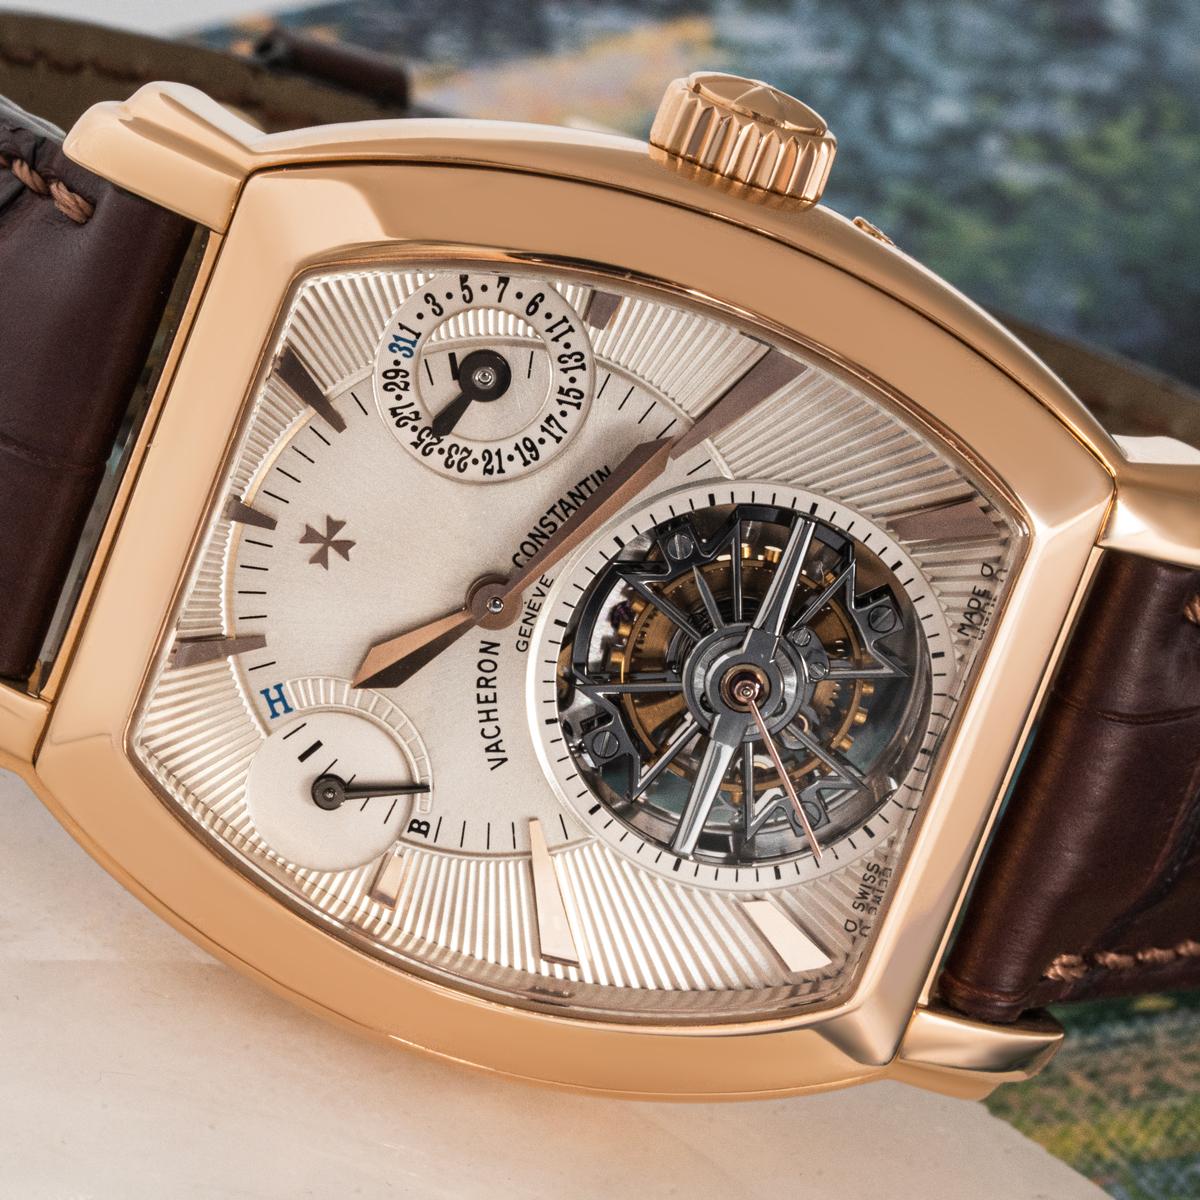 A 36mm Vacheron Constantin Malte Tonneau Tourbillon crafted in rose gold. Featuring a stunning silver dial with a date display, a power reserve indicator, a tourbillion and a rose gold bezel. Fitted with a sapphire glass, a self-winding automatic